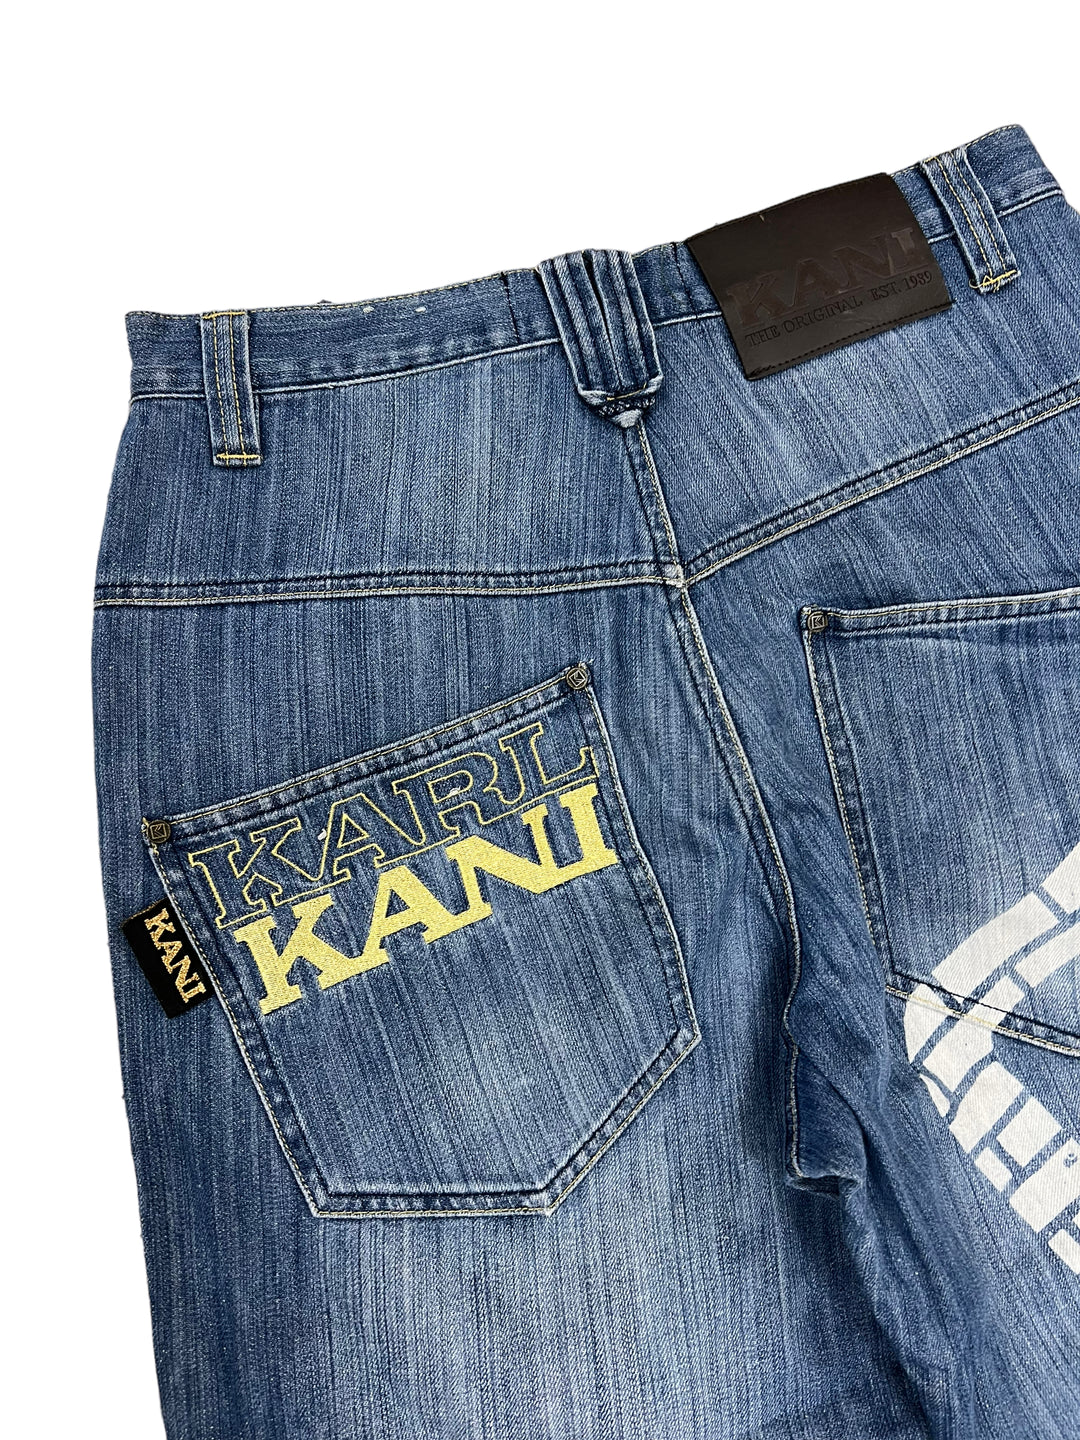 Karl Kani 90’s Baggy Fit Jeans Men’s Small